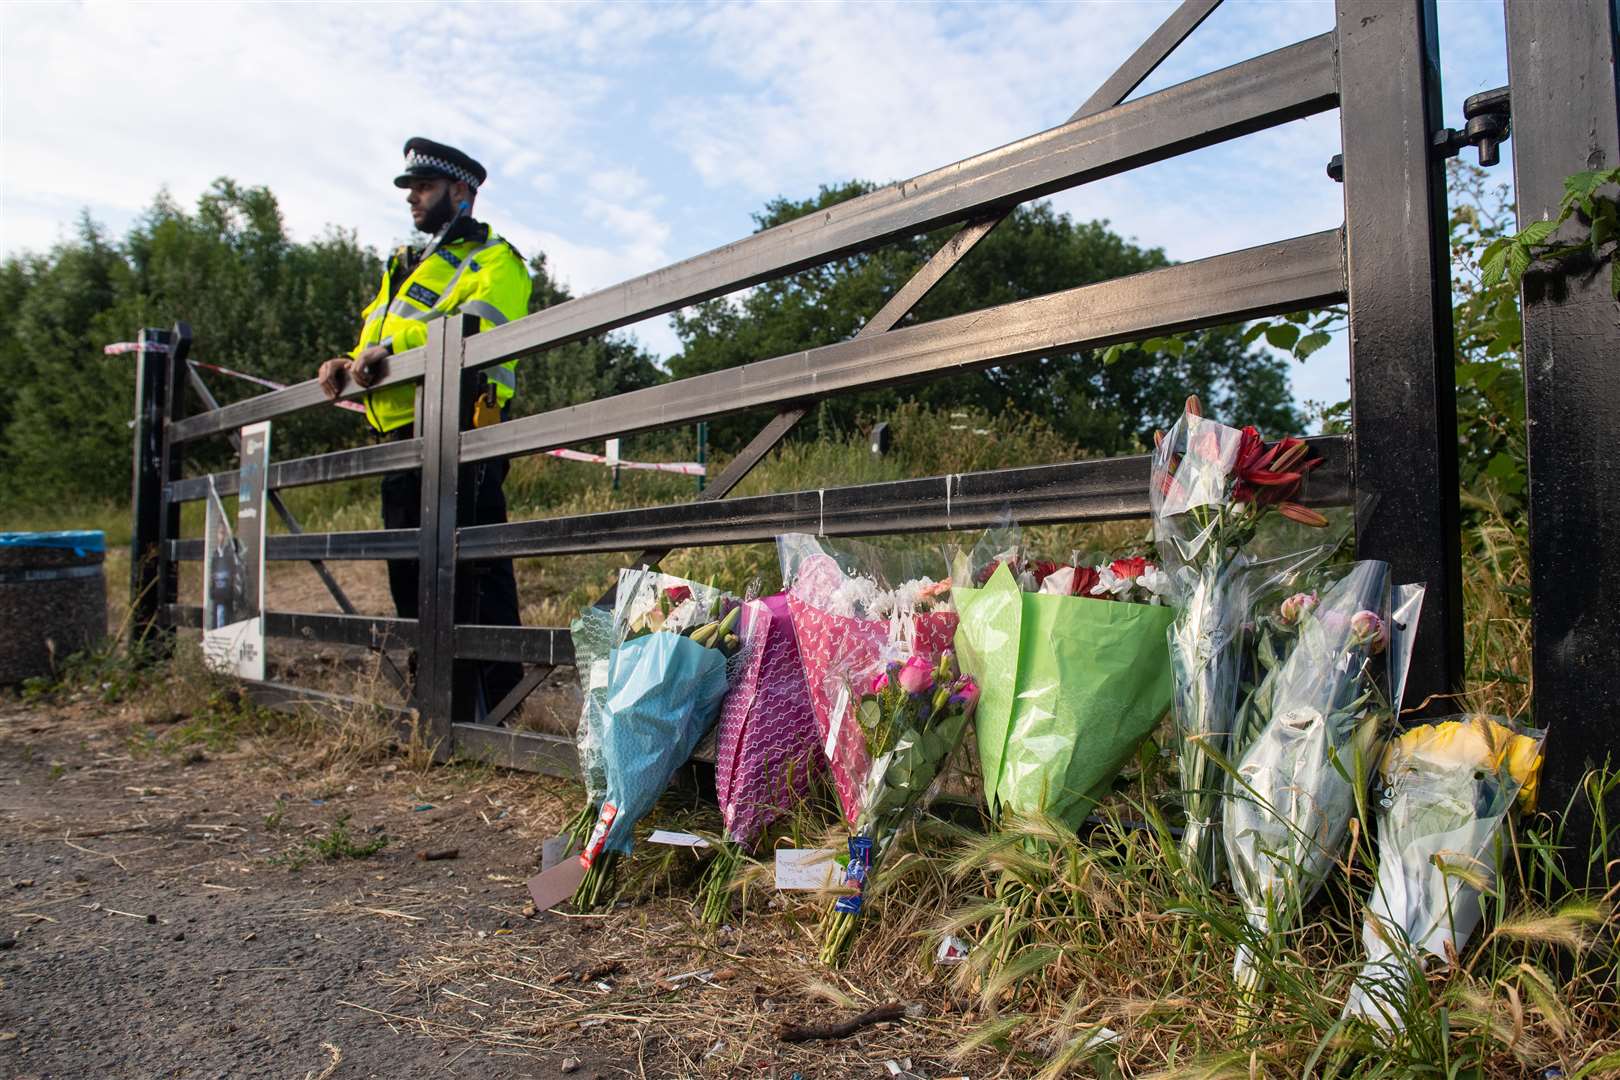 Flowers at an entrance to Fryent Country Park, in Wembley, north-west London, where Nicole Smallman and Bibaa Henry were killed (Dominic Lipinski/PA)